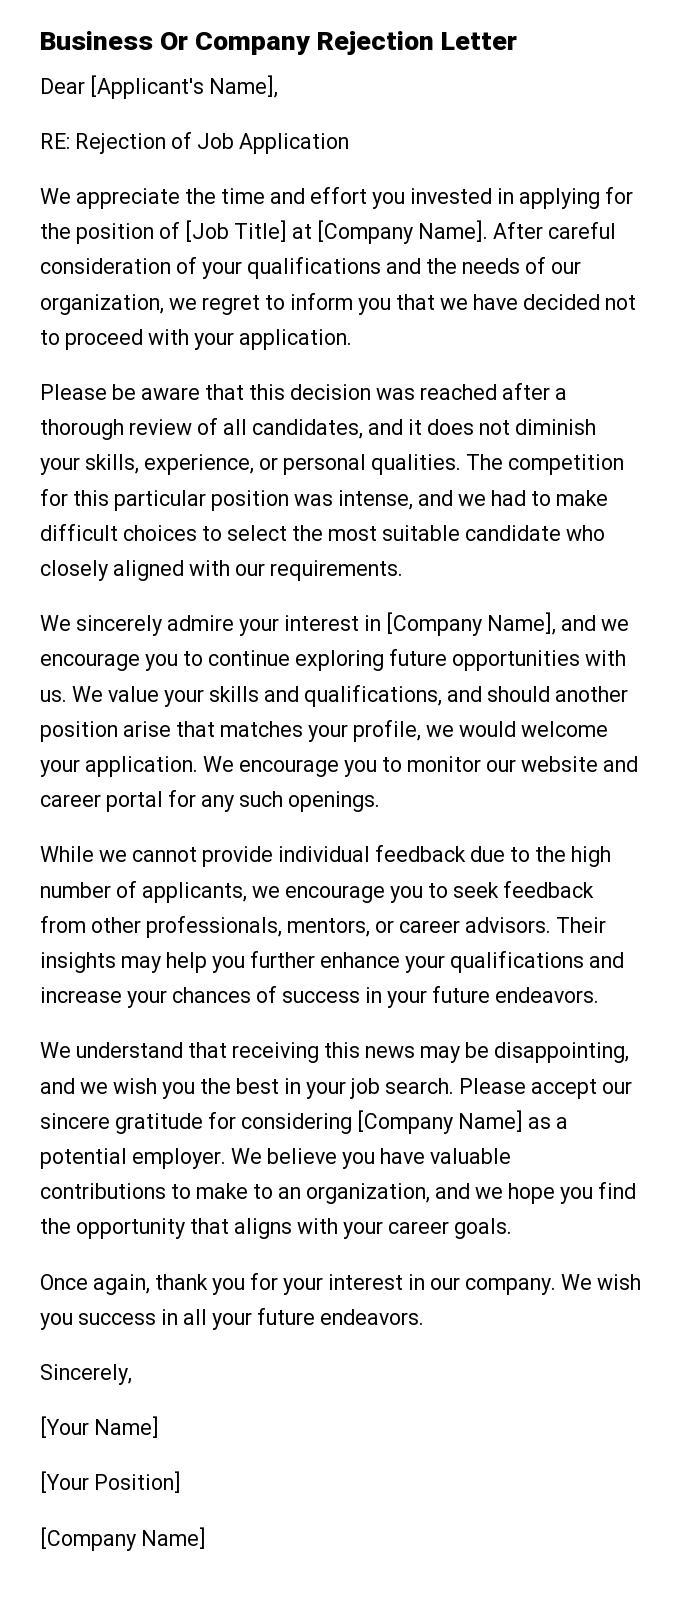 Business Or Company Rejection Letter